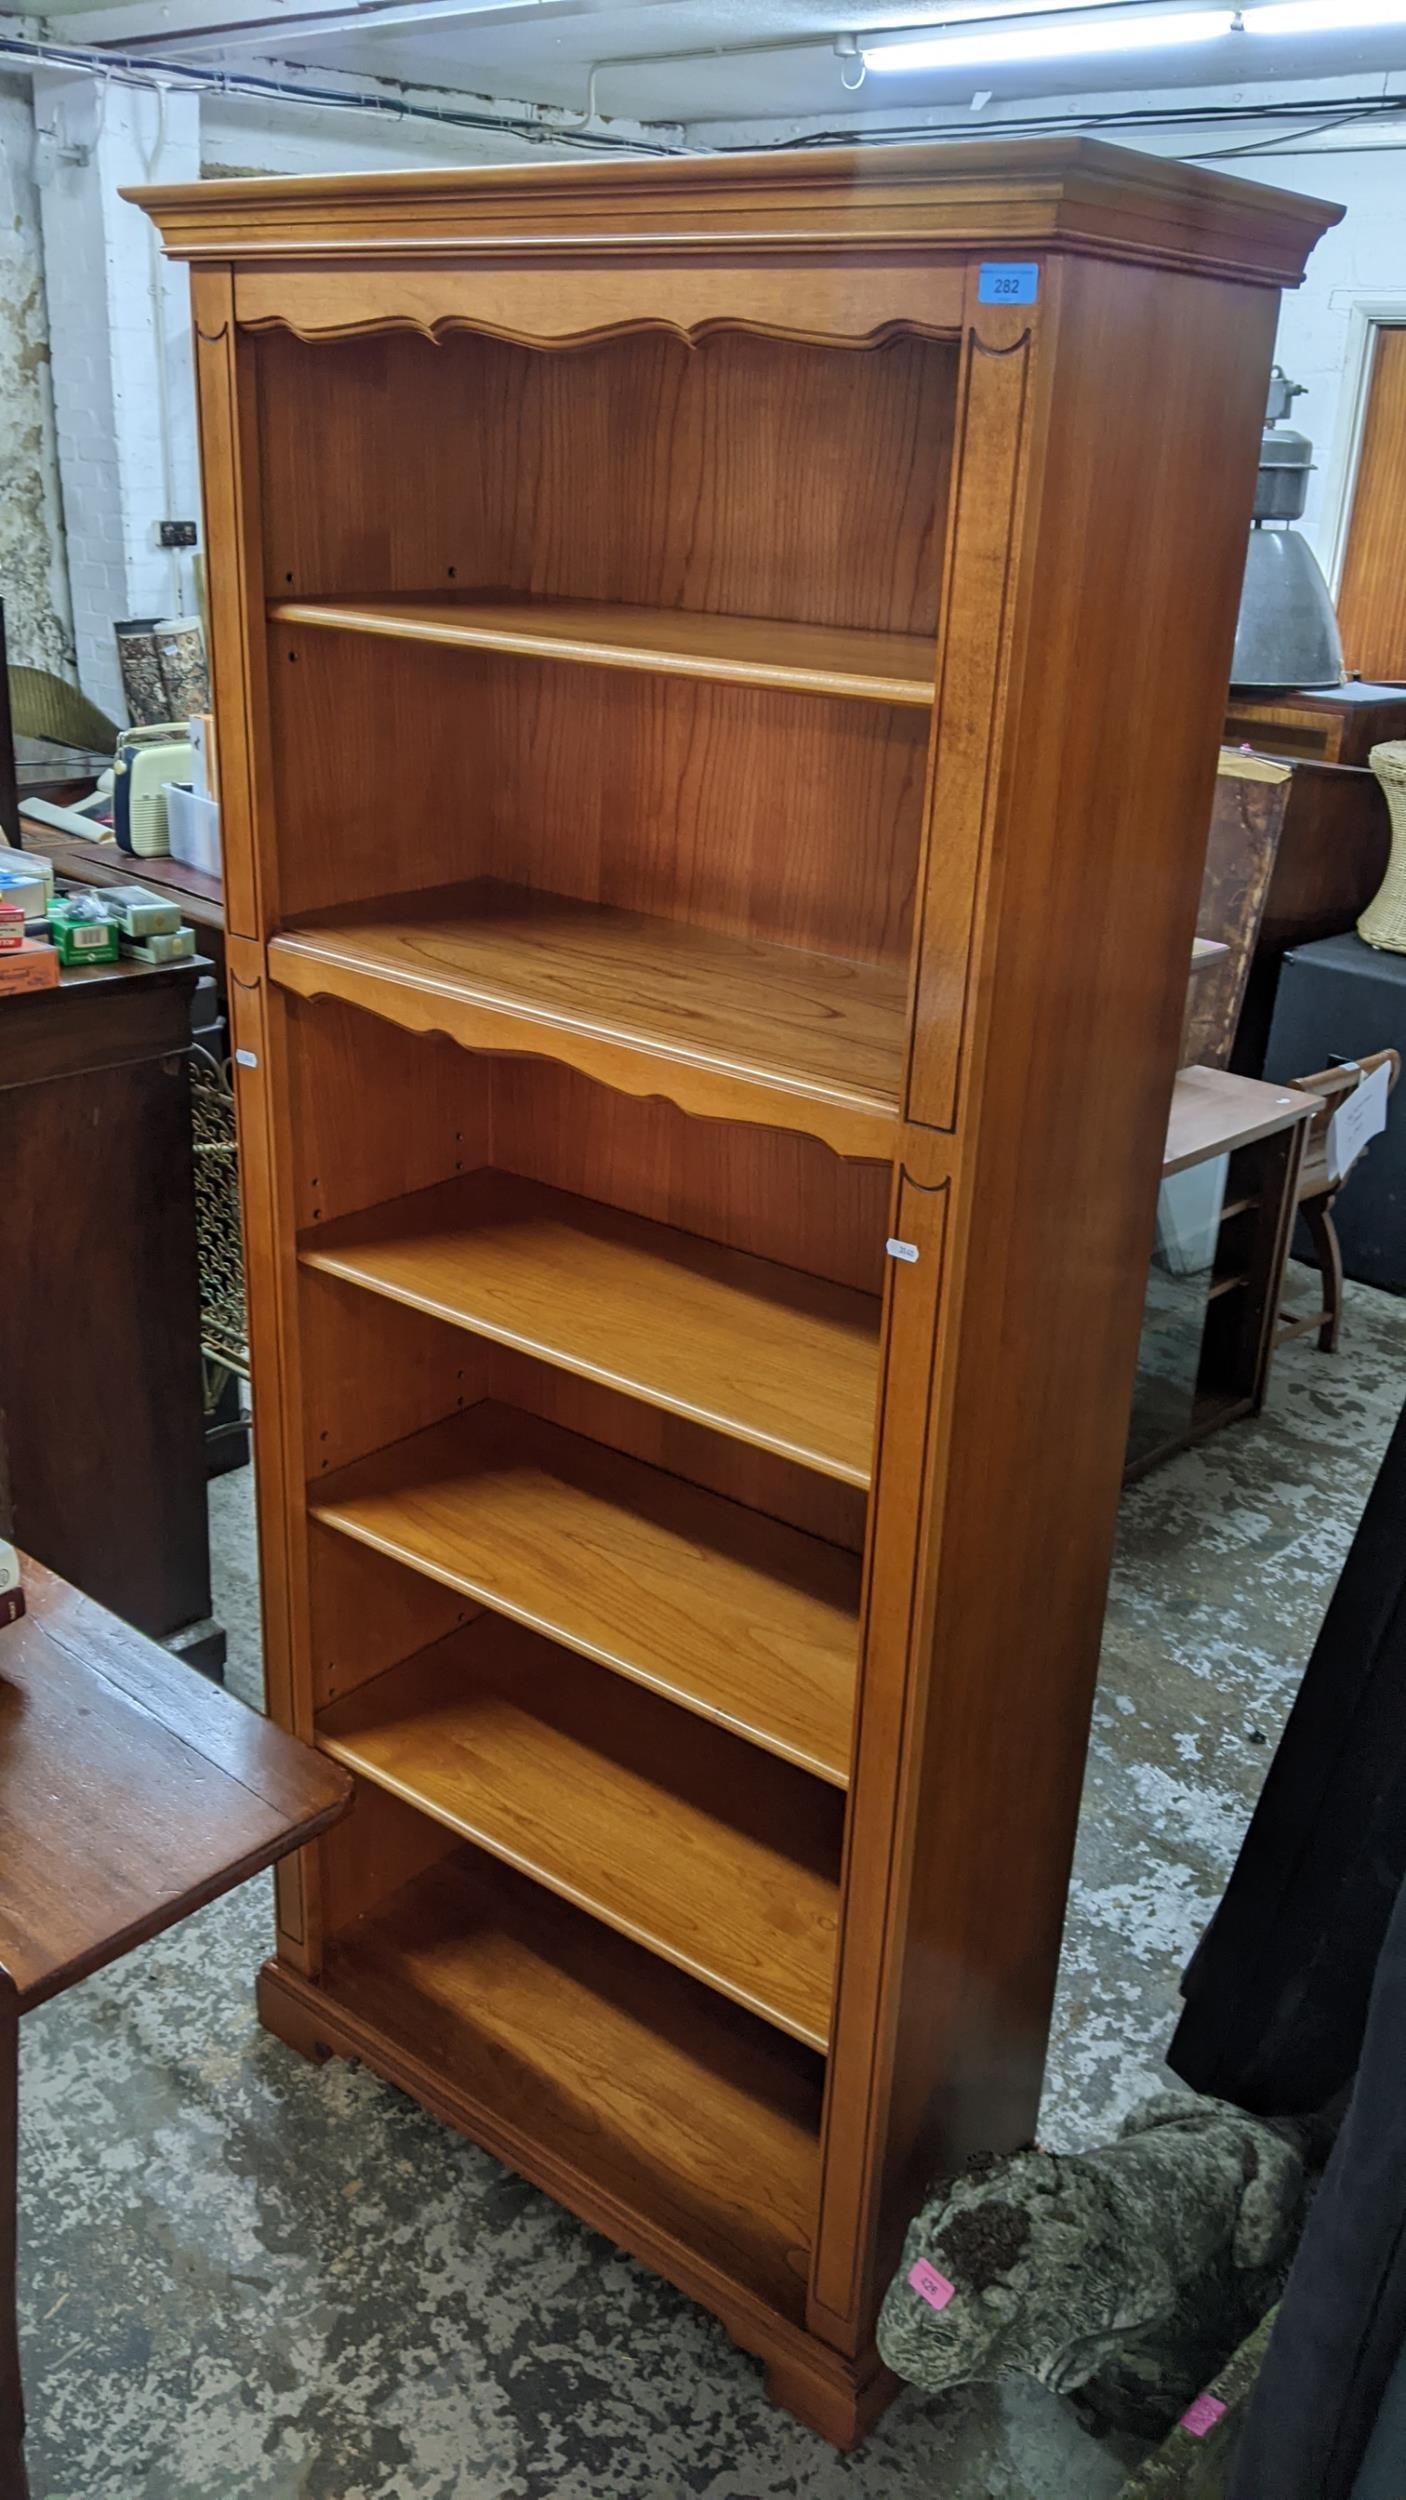 A modern Younger six tier open bookcase having a stepped cornice and bracket shaped feet, 181.5cm